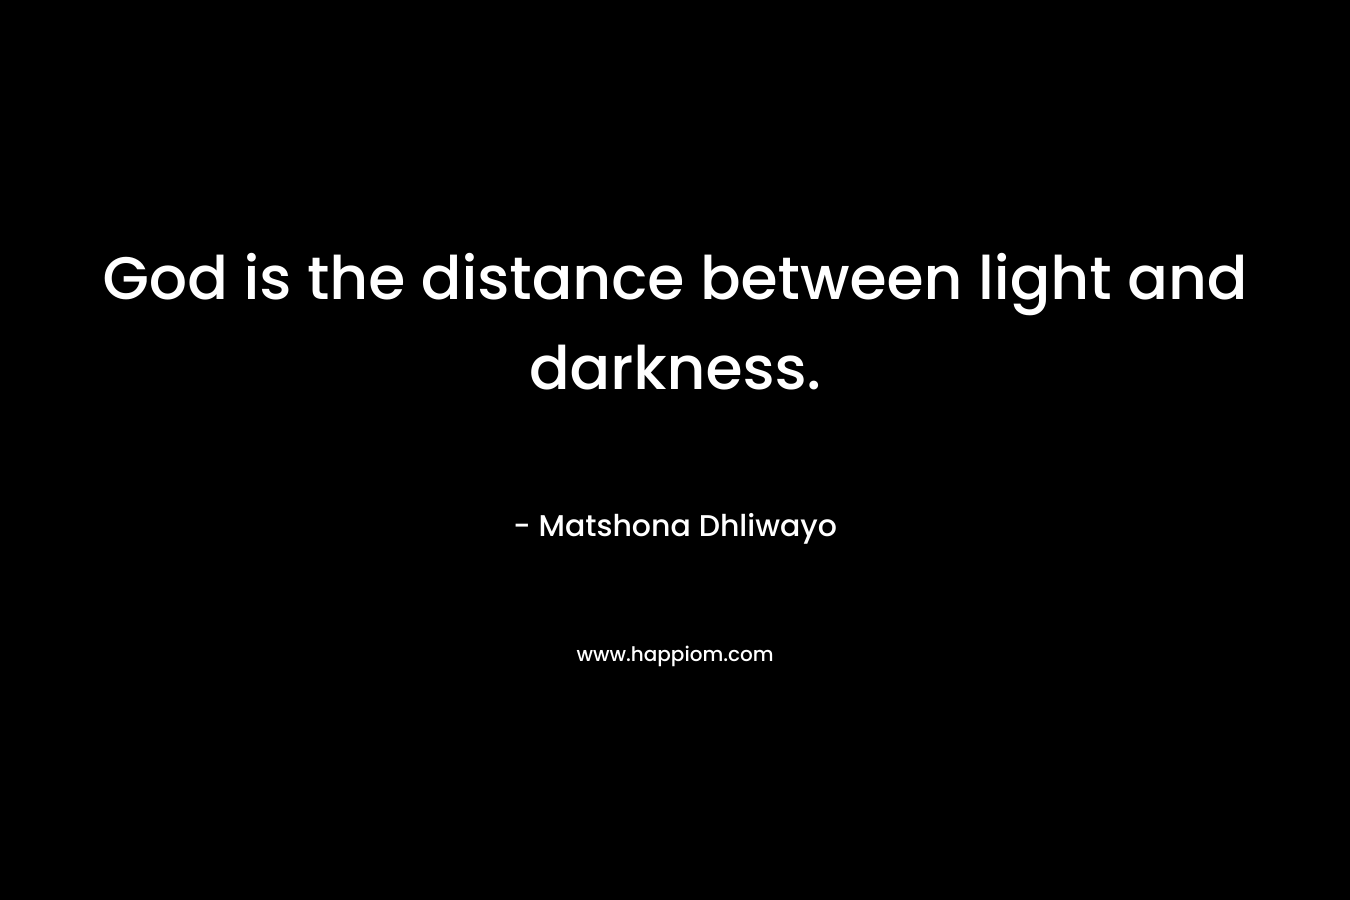 God is the distance between light and darkness.